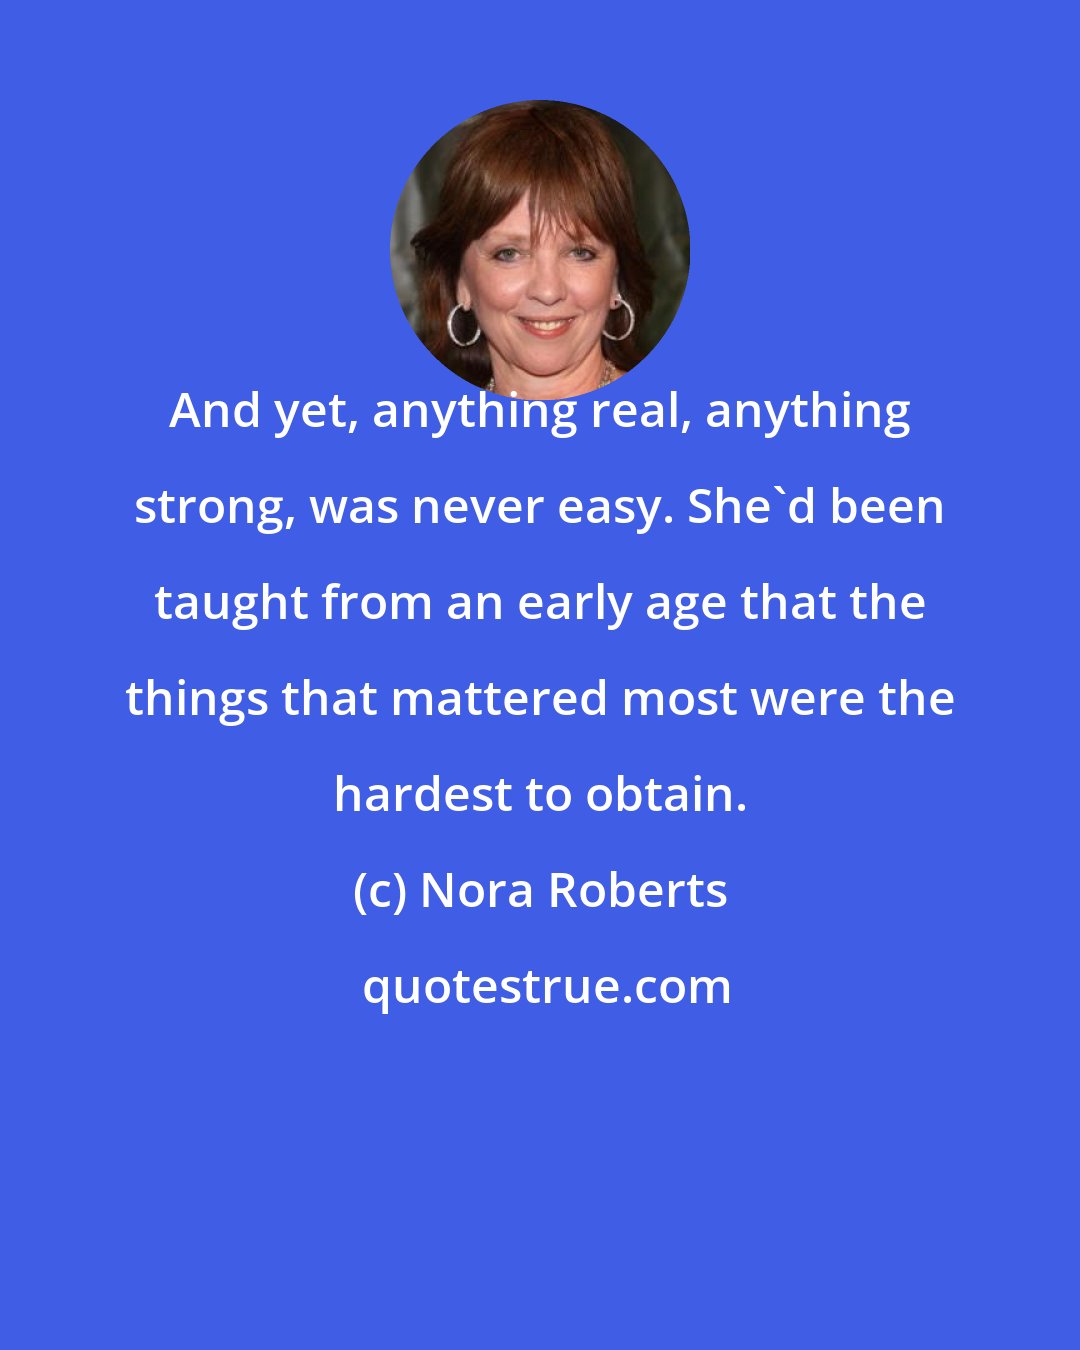 Nora Roberts: And yet, anything real, anything strong, was never easy. She'd been taught from an early age that the things that mattered most were the hardest to obtain.